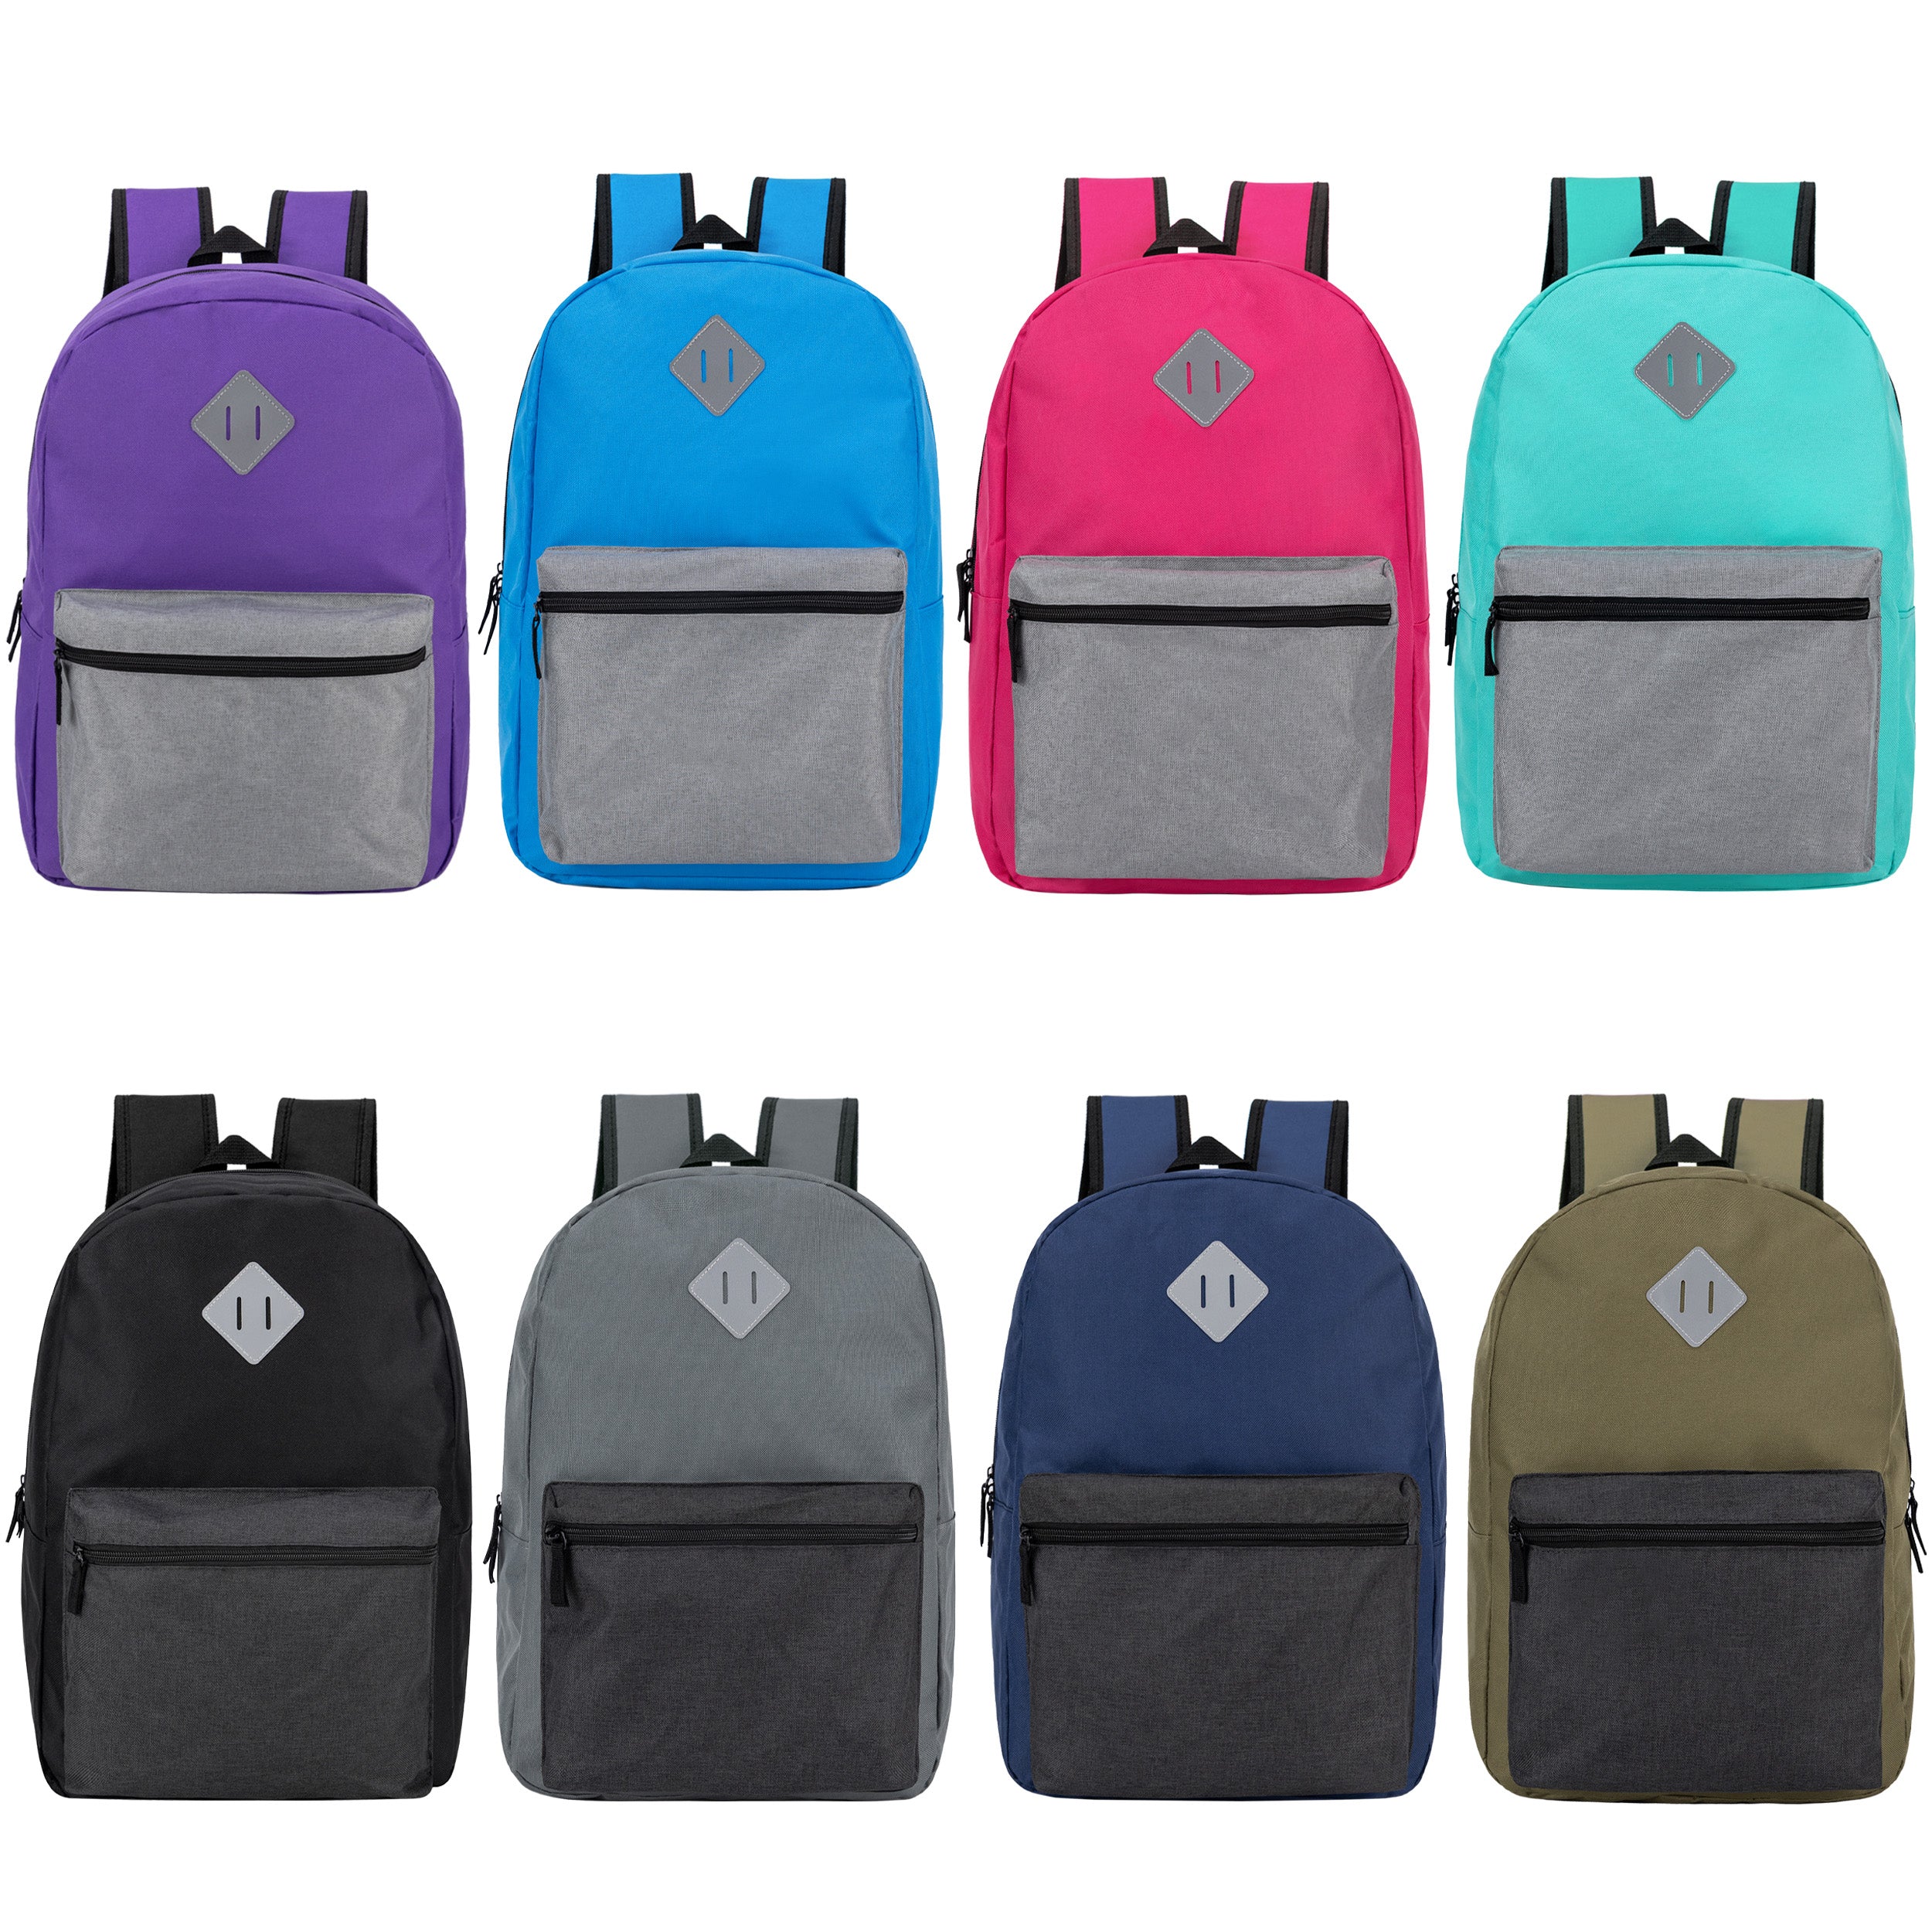 17" Wholesale Two Tone Backpack with a Diamond Patch in 8 Colors - Bulk Case of 24 Bookbags